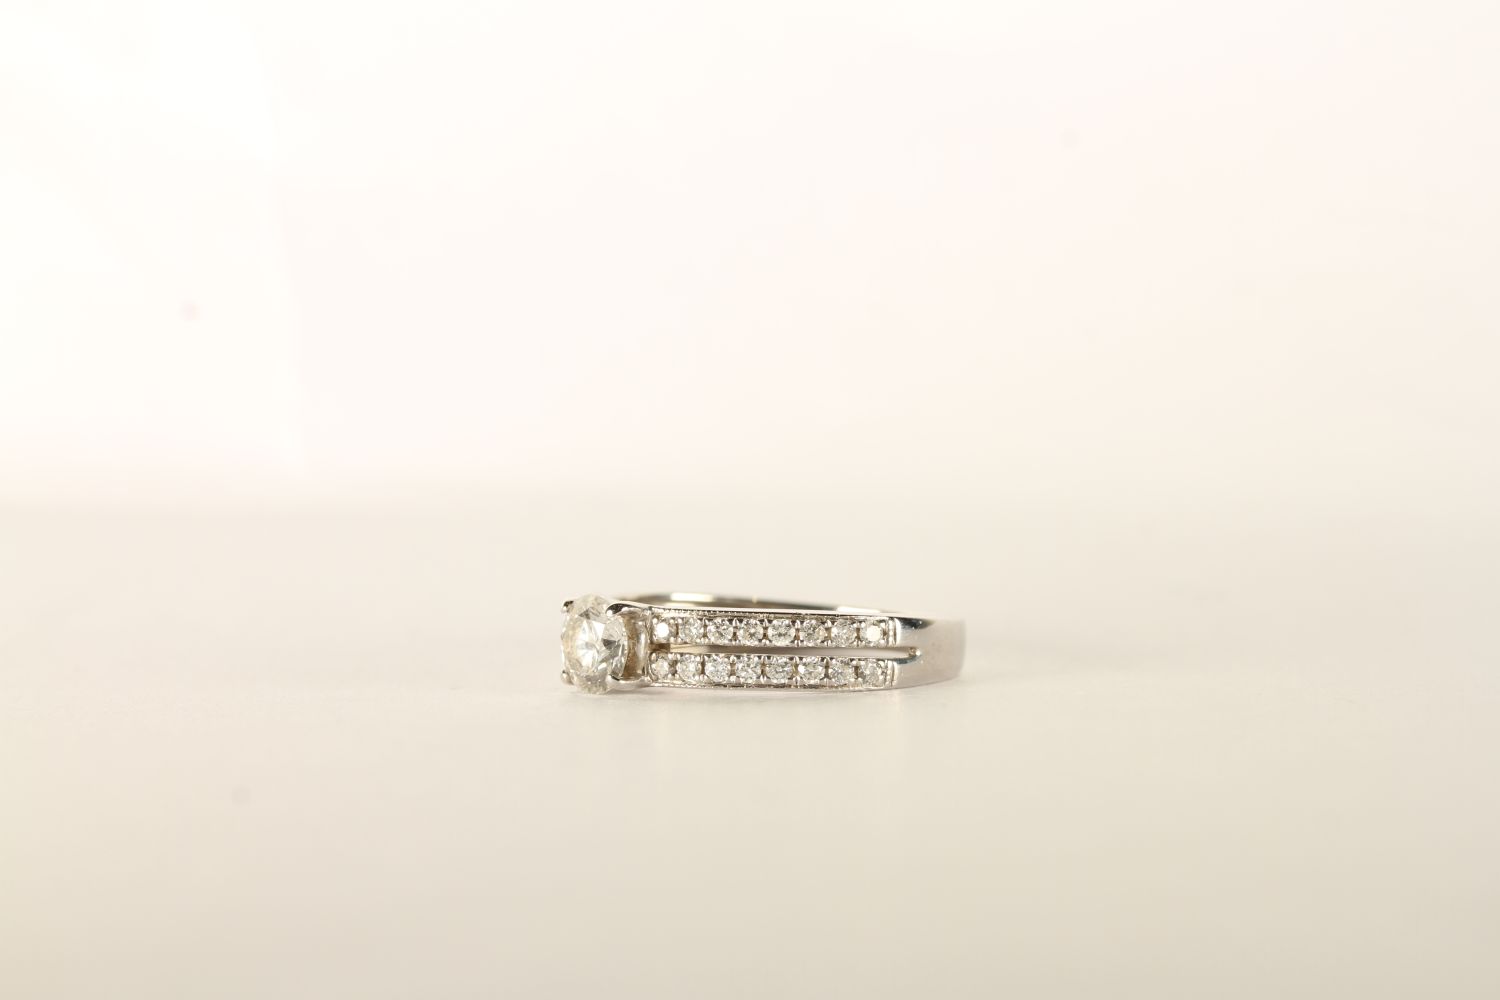 Diamond Ring, centre set with a round brilliant cut diamond, 4 claw set, shoulders set with 2 rows - Image 2 of 2